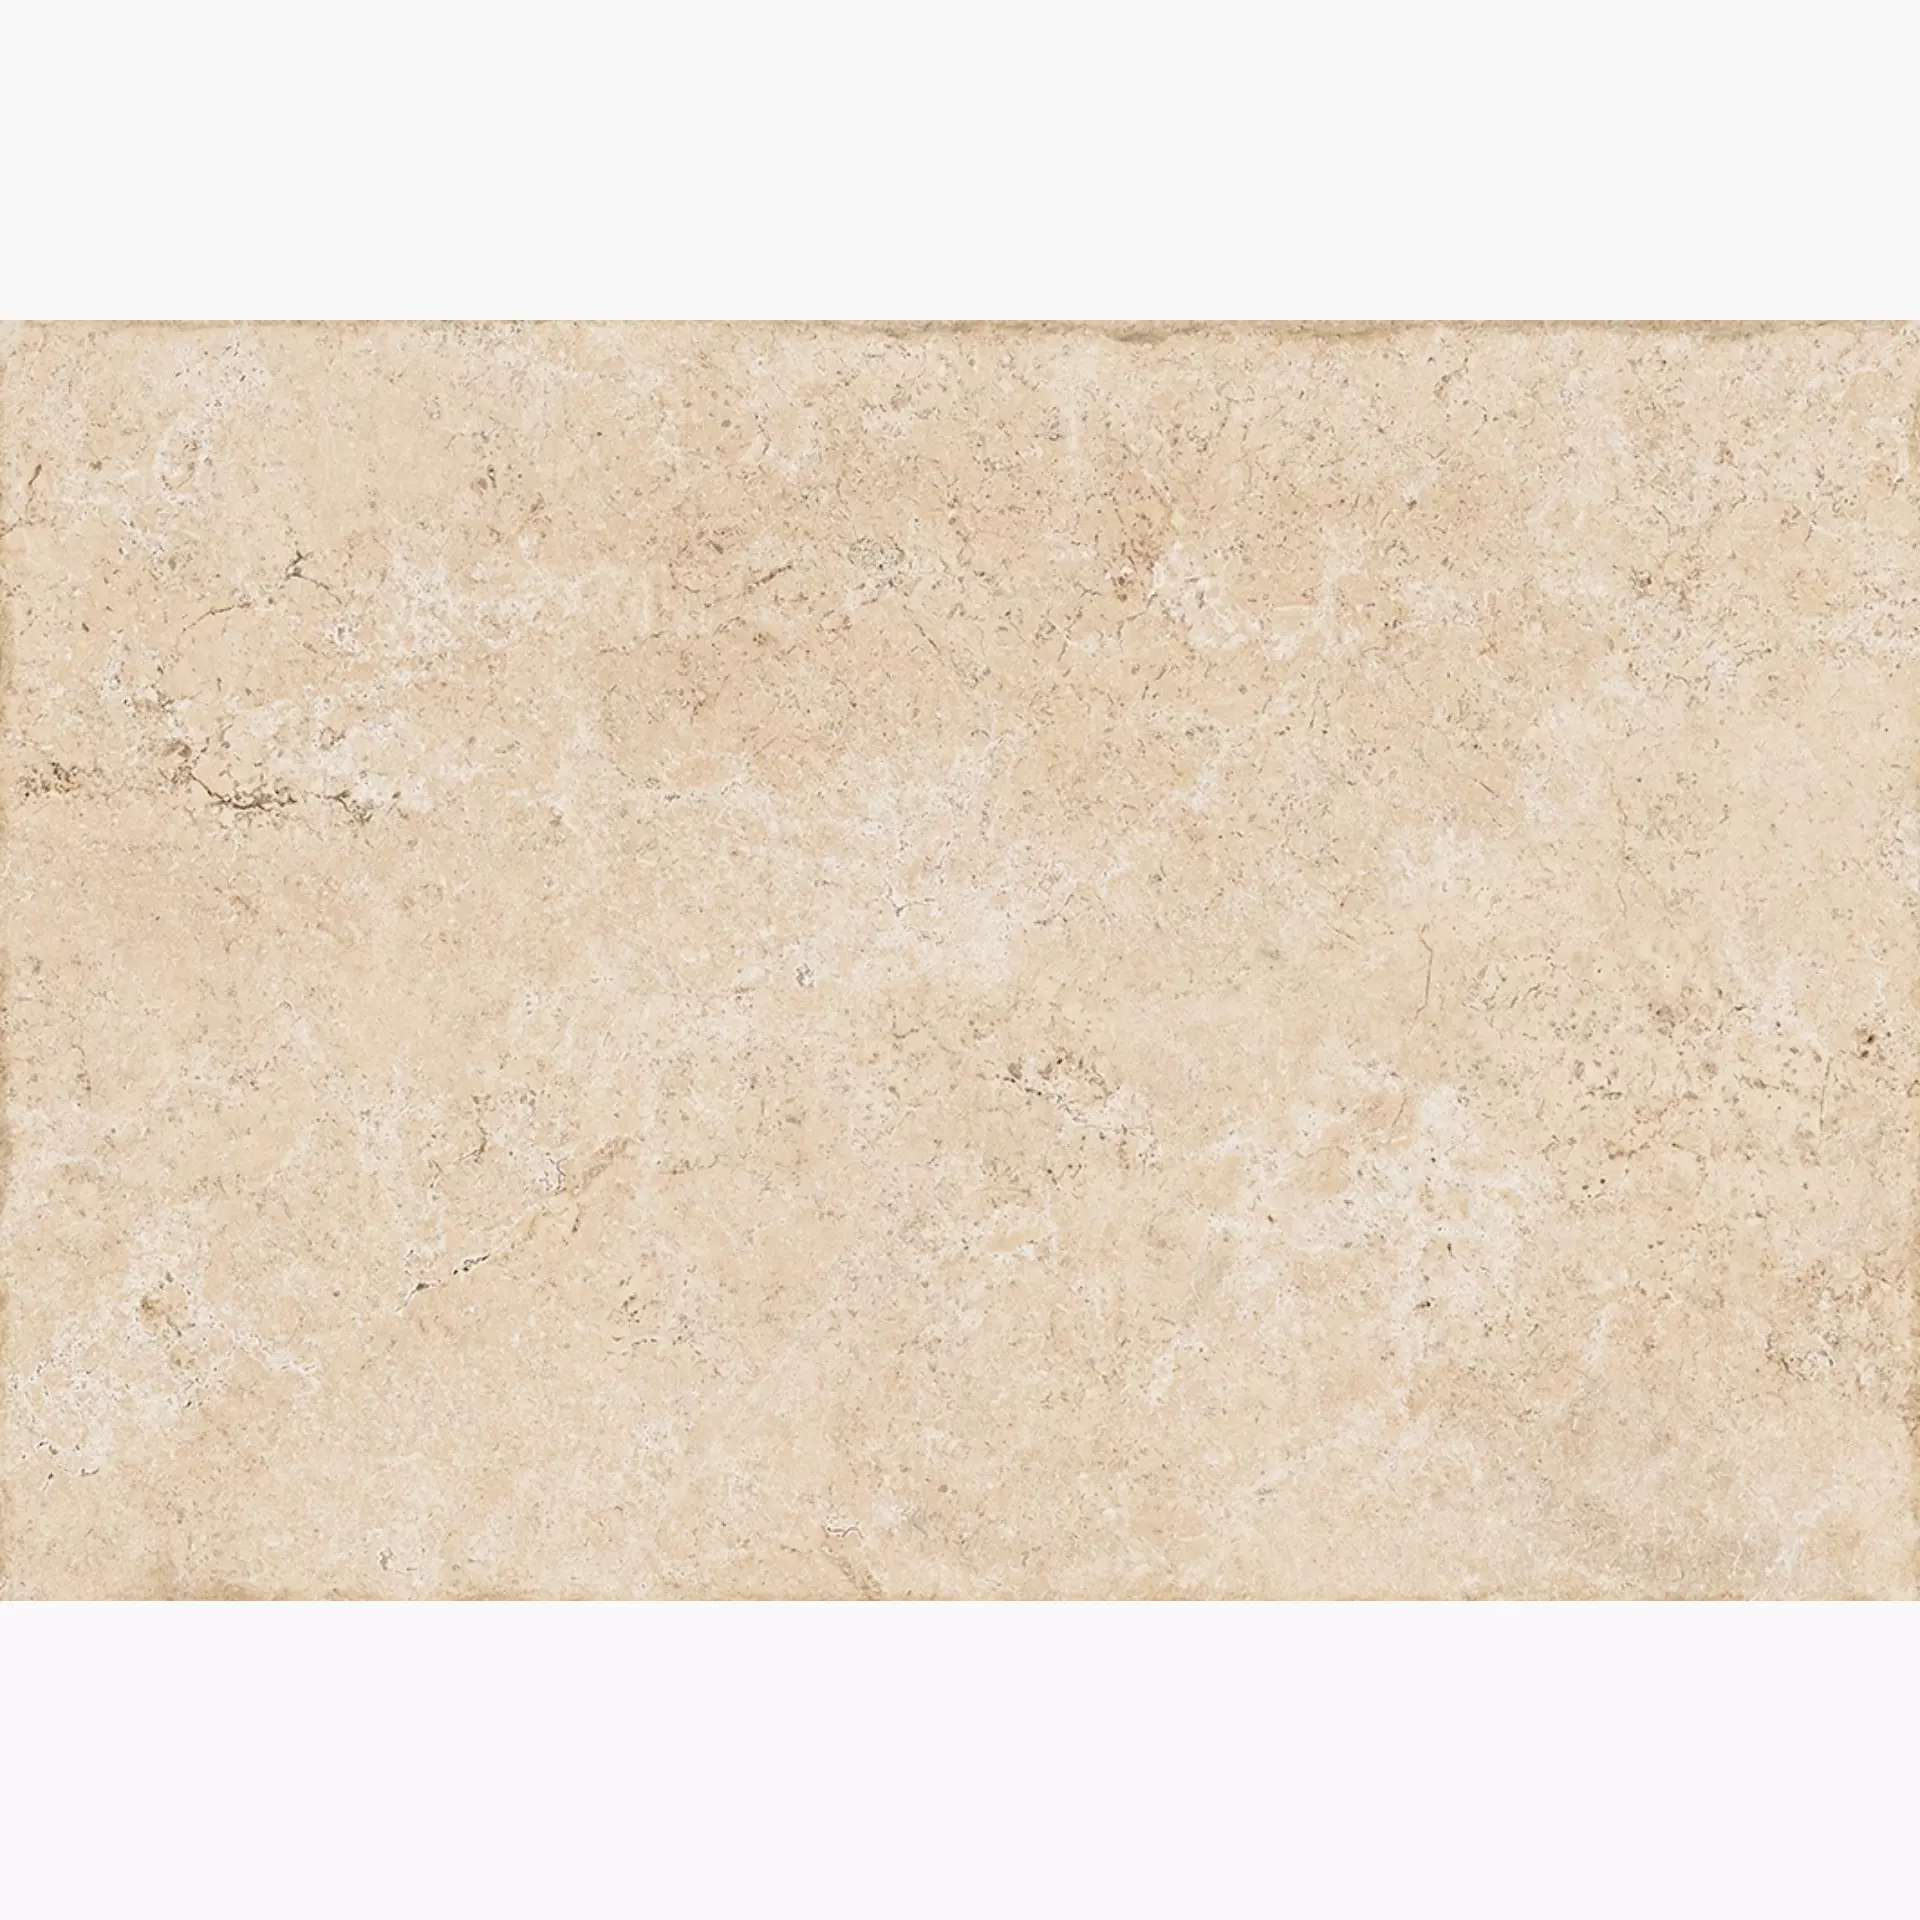 Sichenia Amboise Beige Smooth Chipped Edge 0192642 60x90cm rectified 10mm